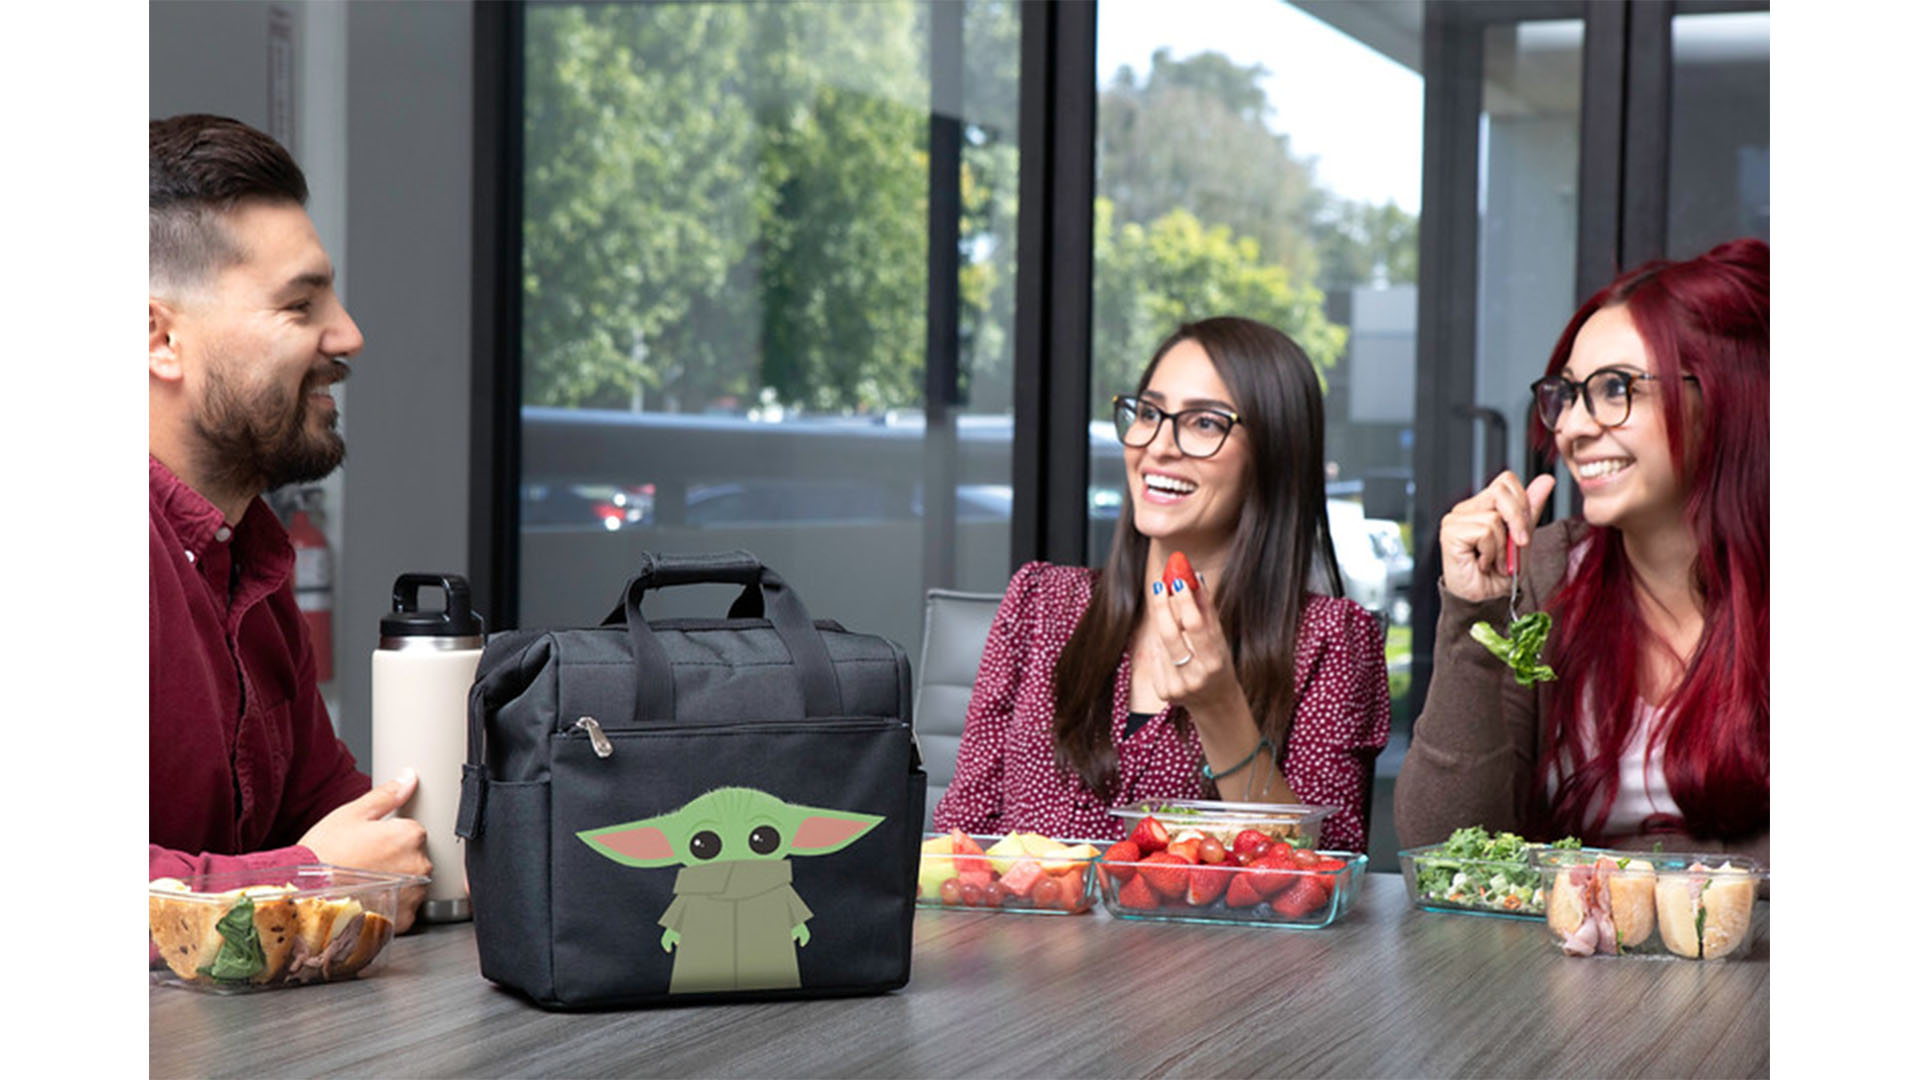 A group of three enjoys lunch from a Grogu lunchbox set inspired by Star Wars: The Mandalorian